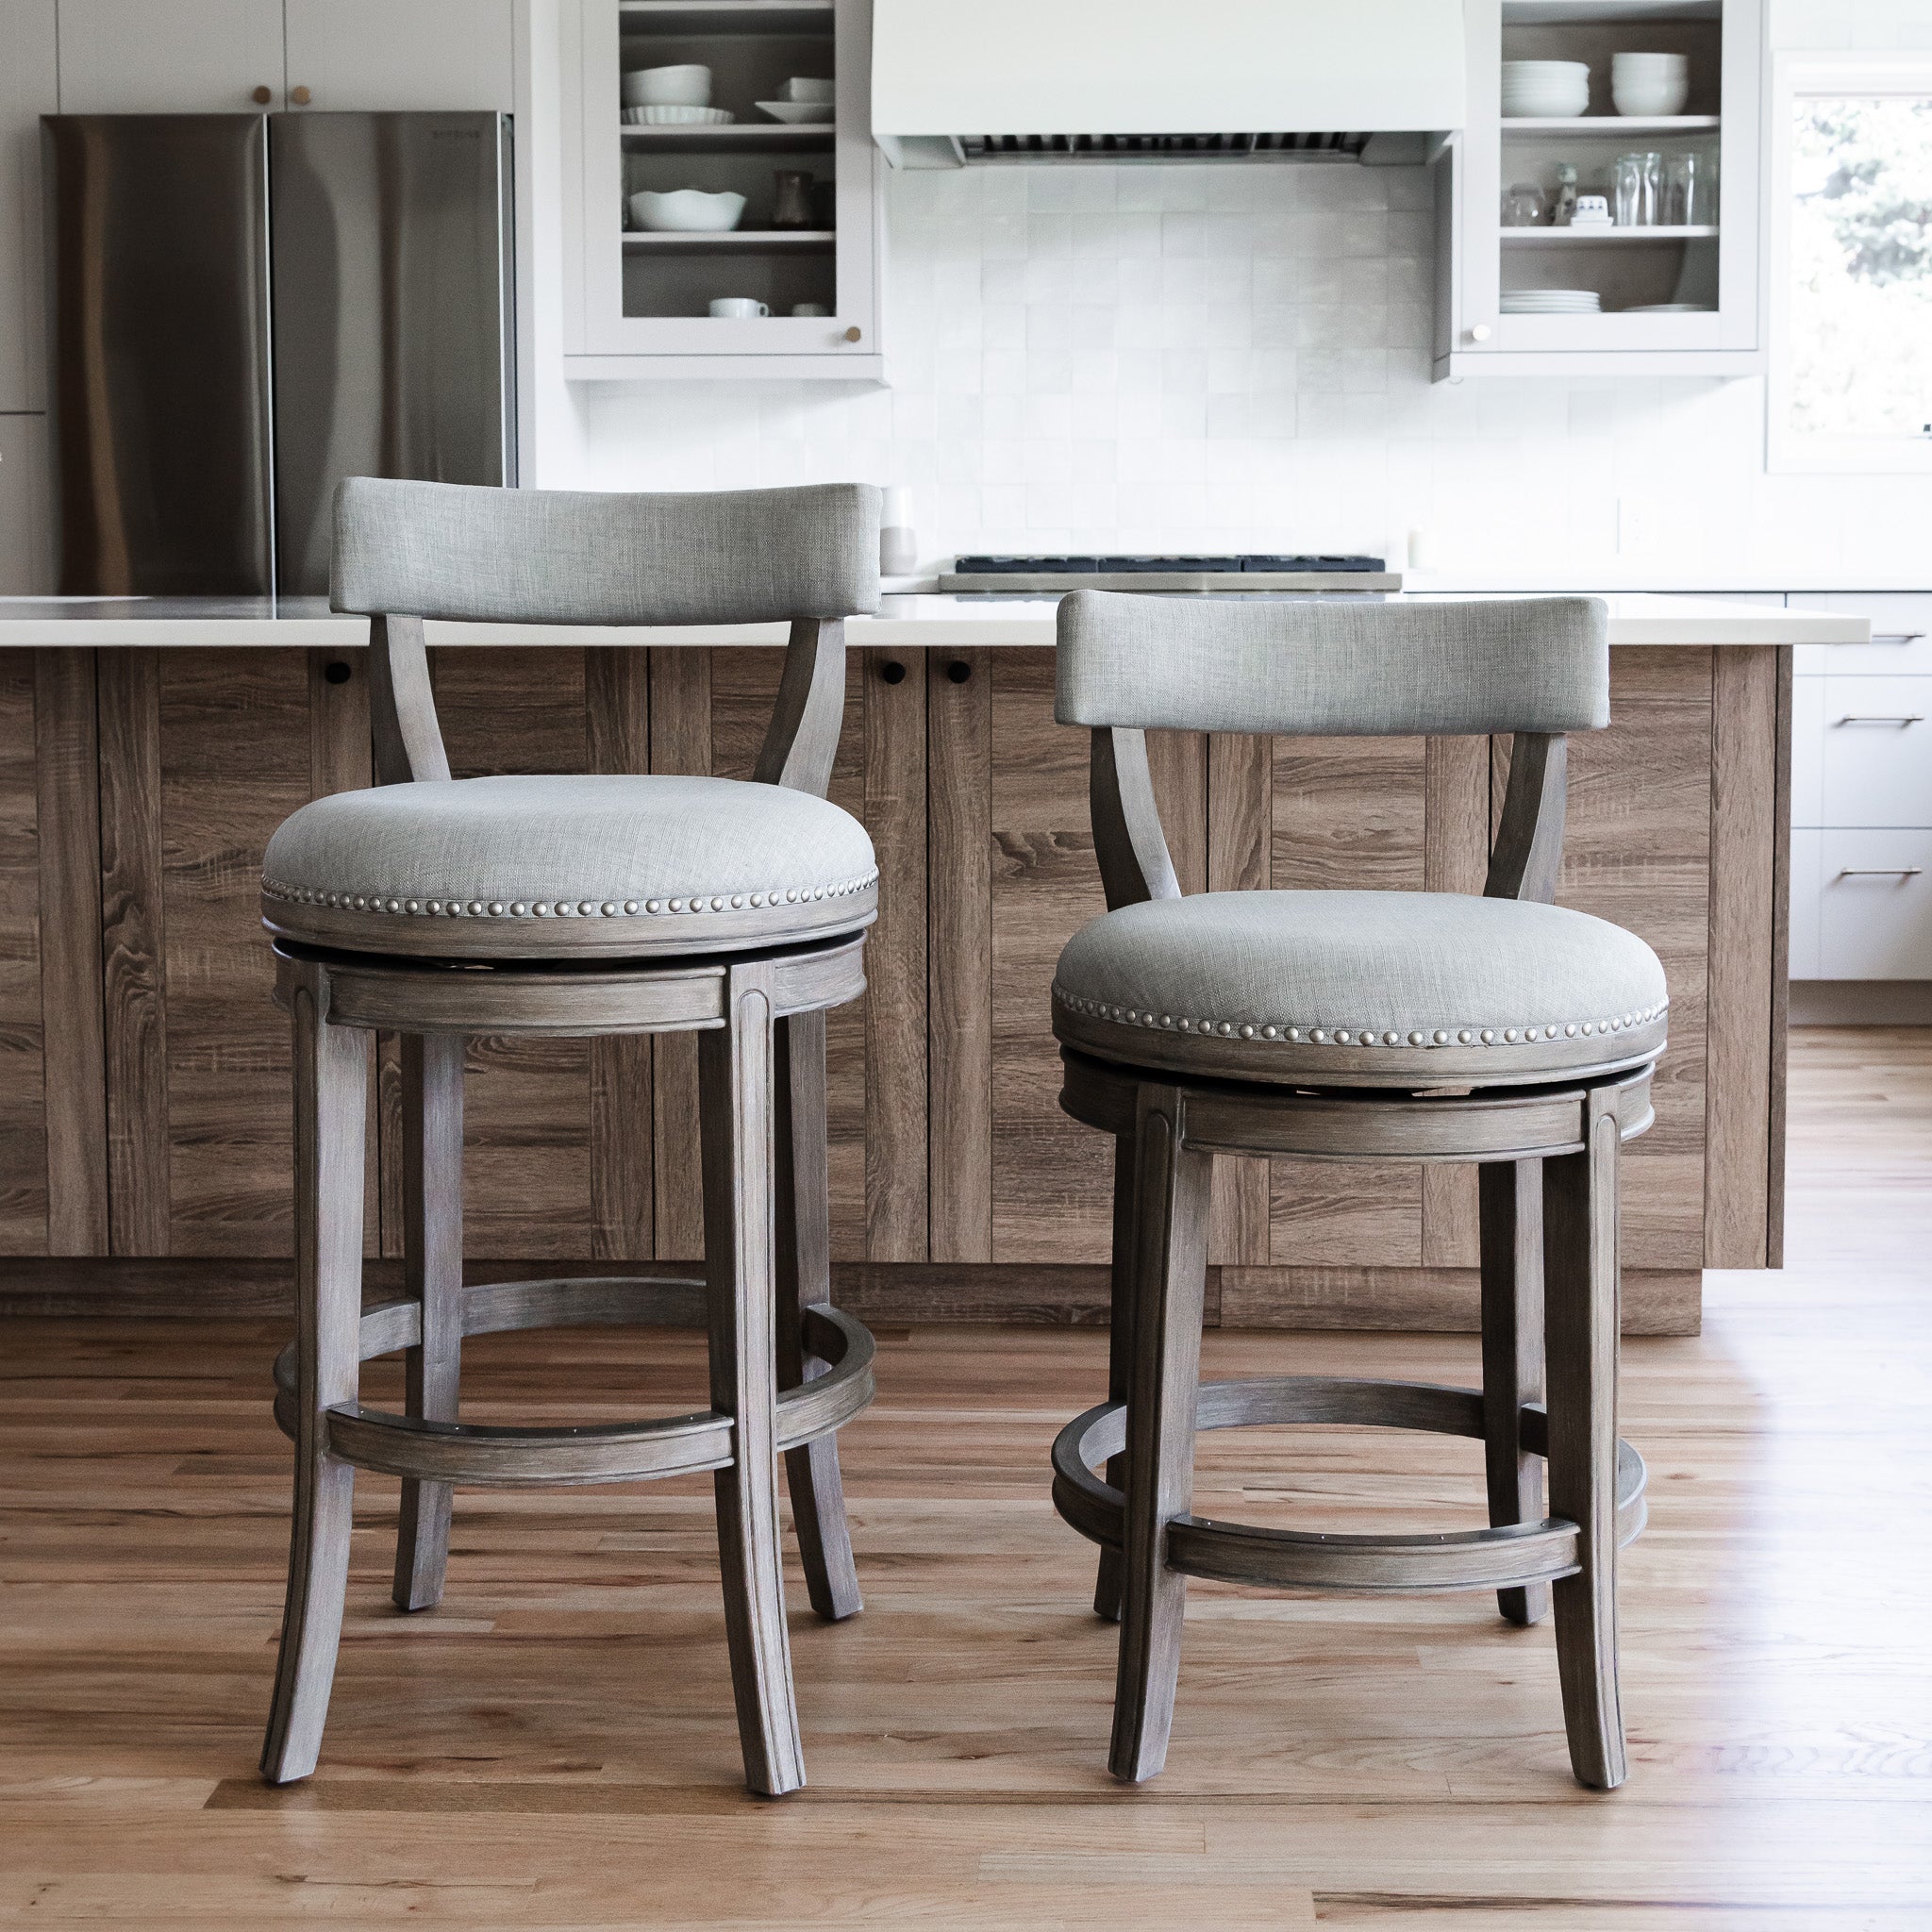 Alexander Counter Stool in Reclaimed Oak Finish with Ash Grey Fabric Upholstery in Stools by Maven Lane